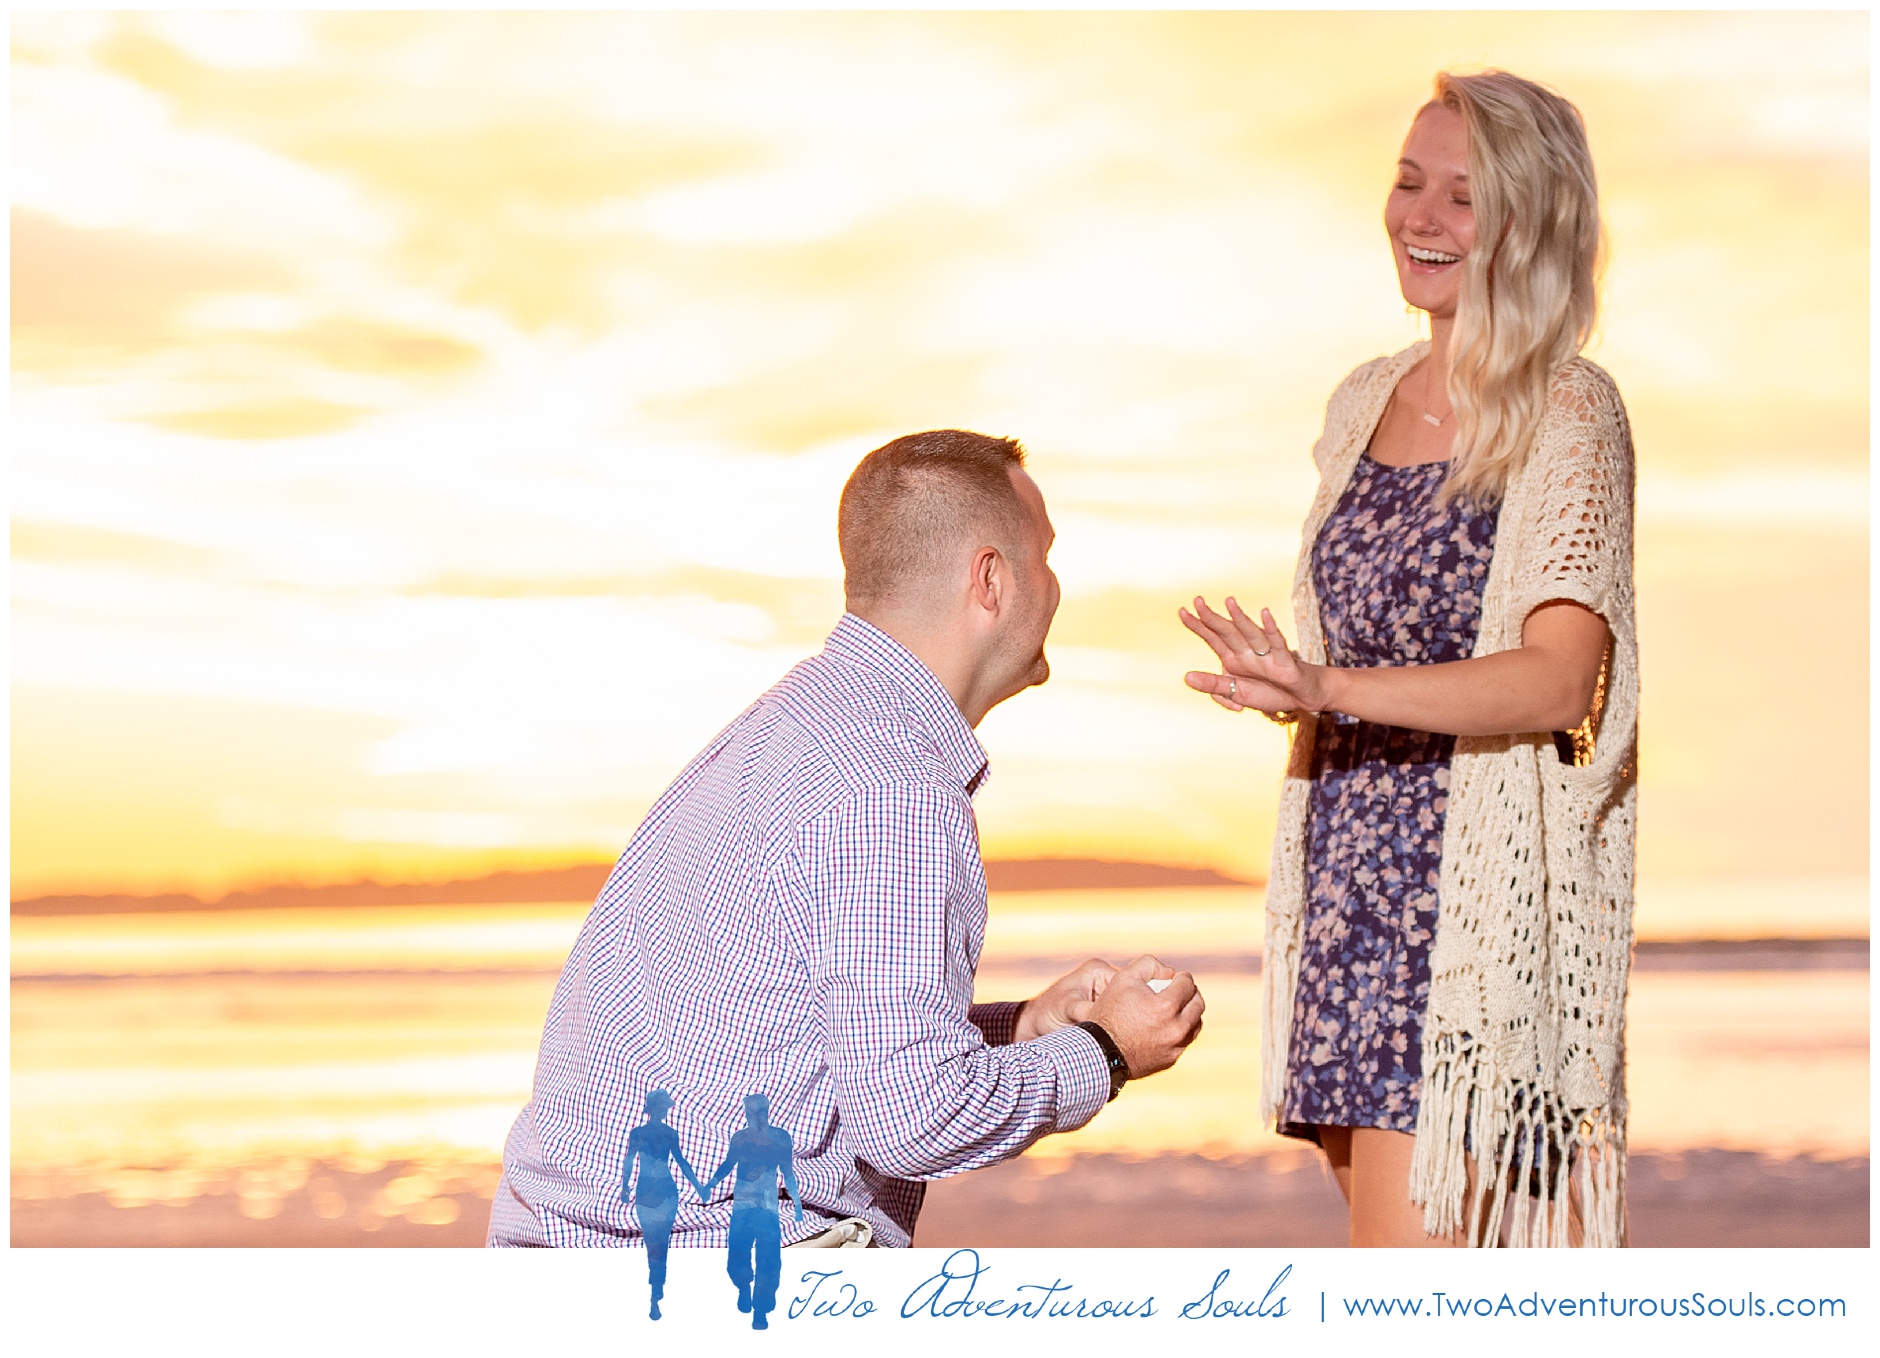 Surprise Proposal, Old Orchard Beach Photographer, Proposal Photographer in maine, Two Adventurous Souls_0002.jpg